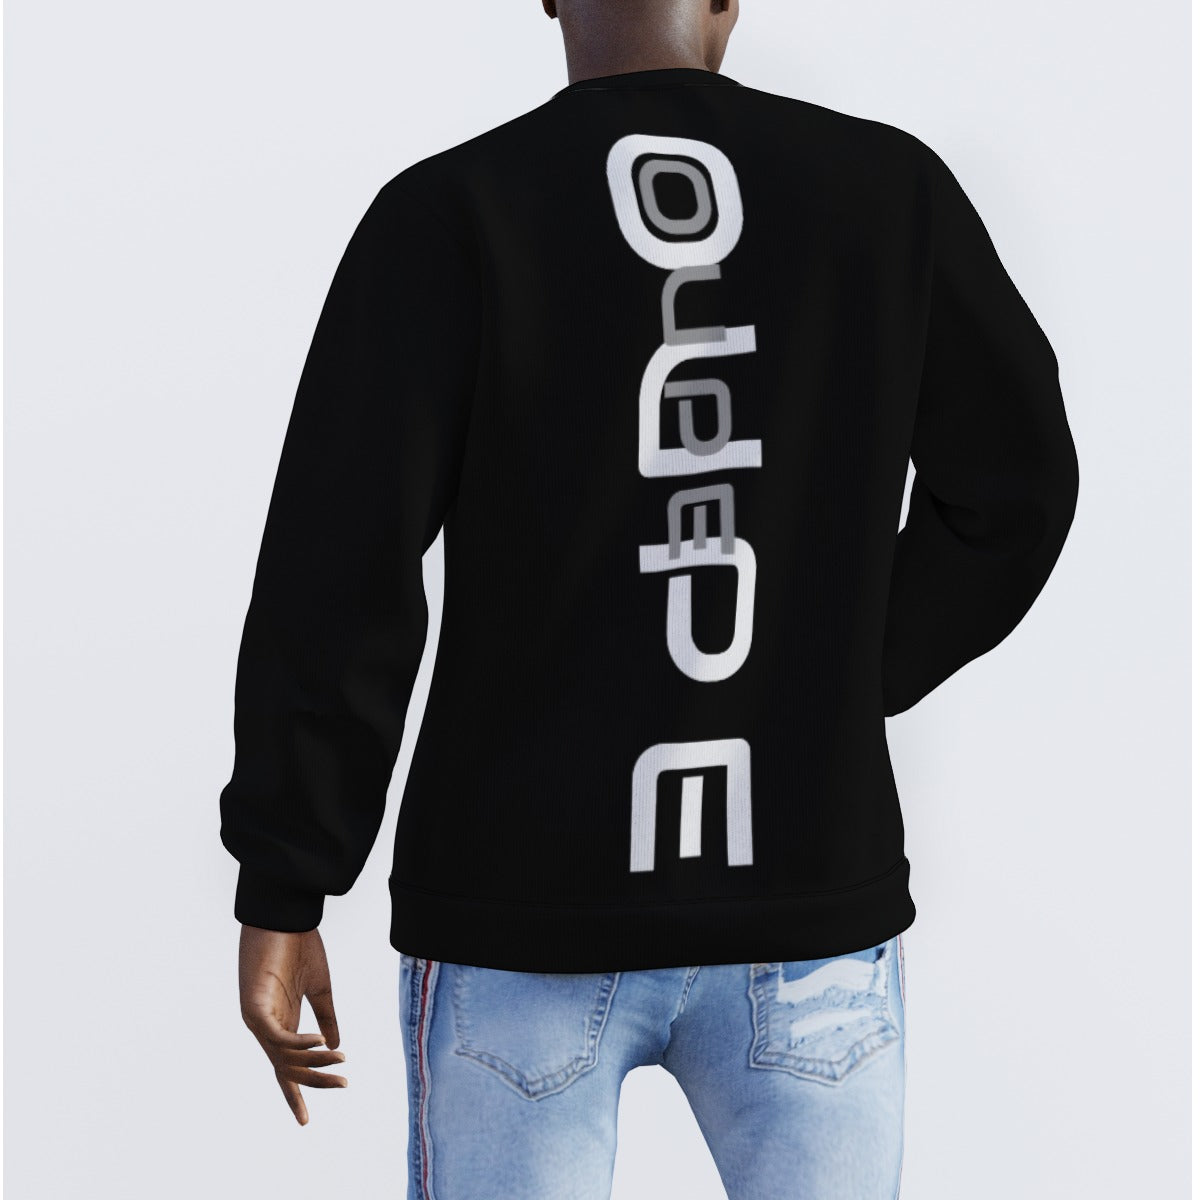 OUPE OUPE Print Men's Sweater BLACK